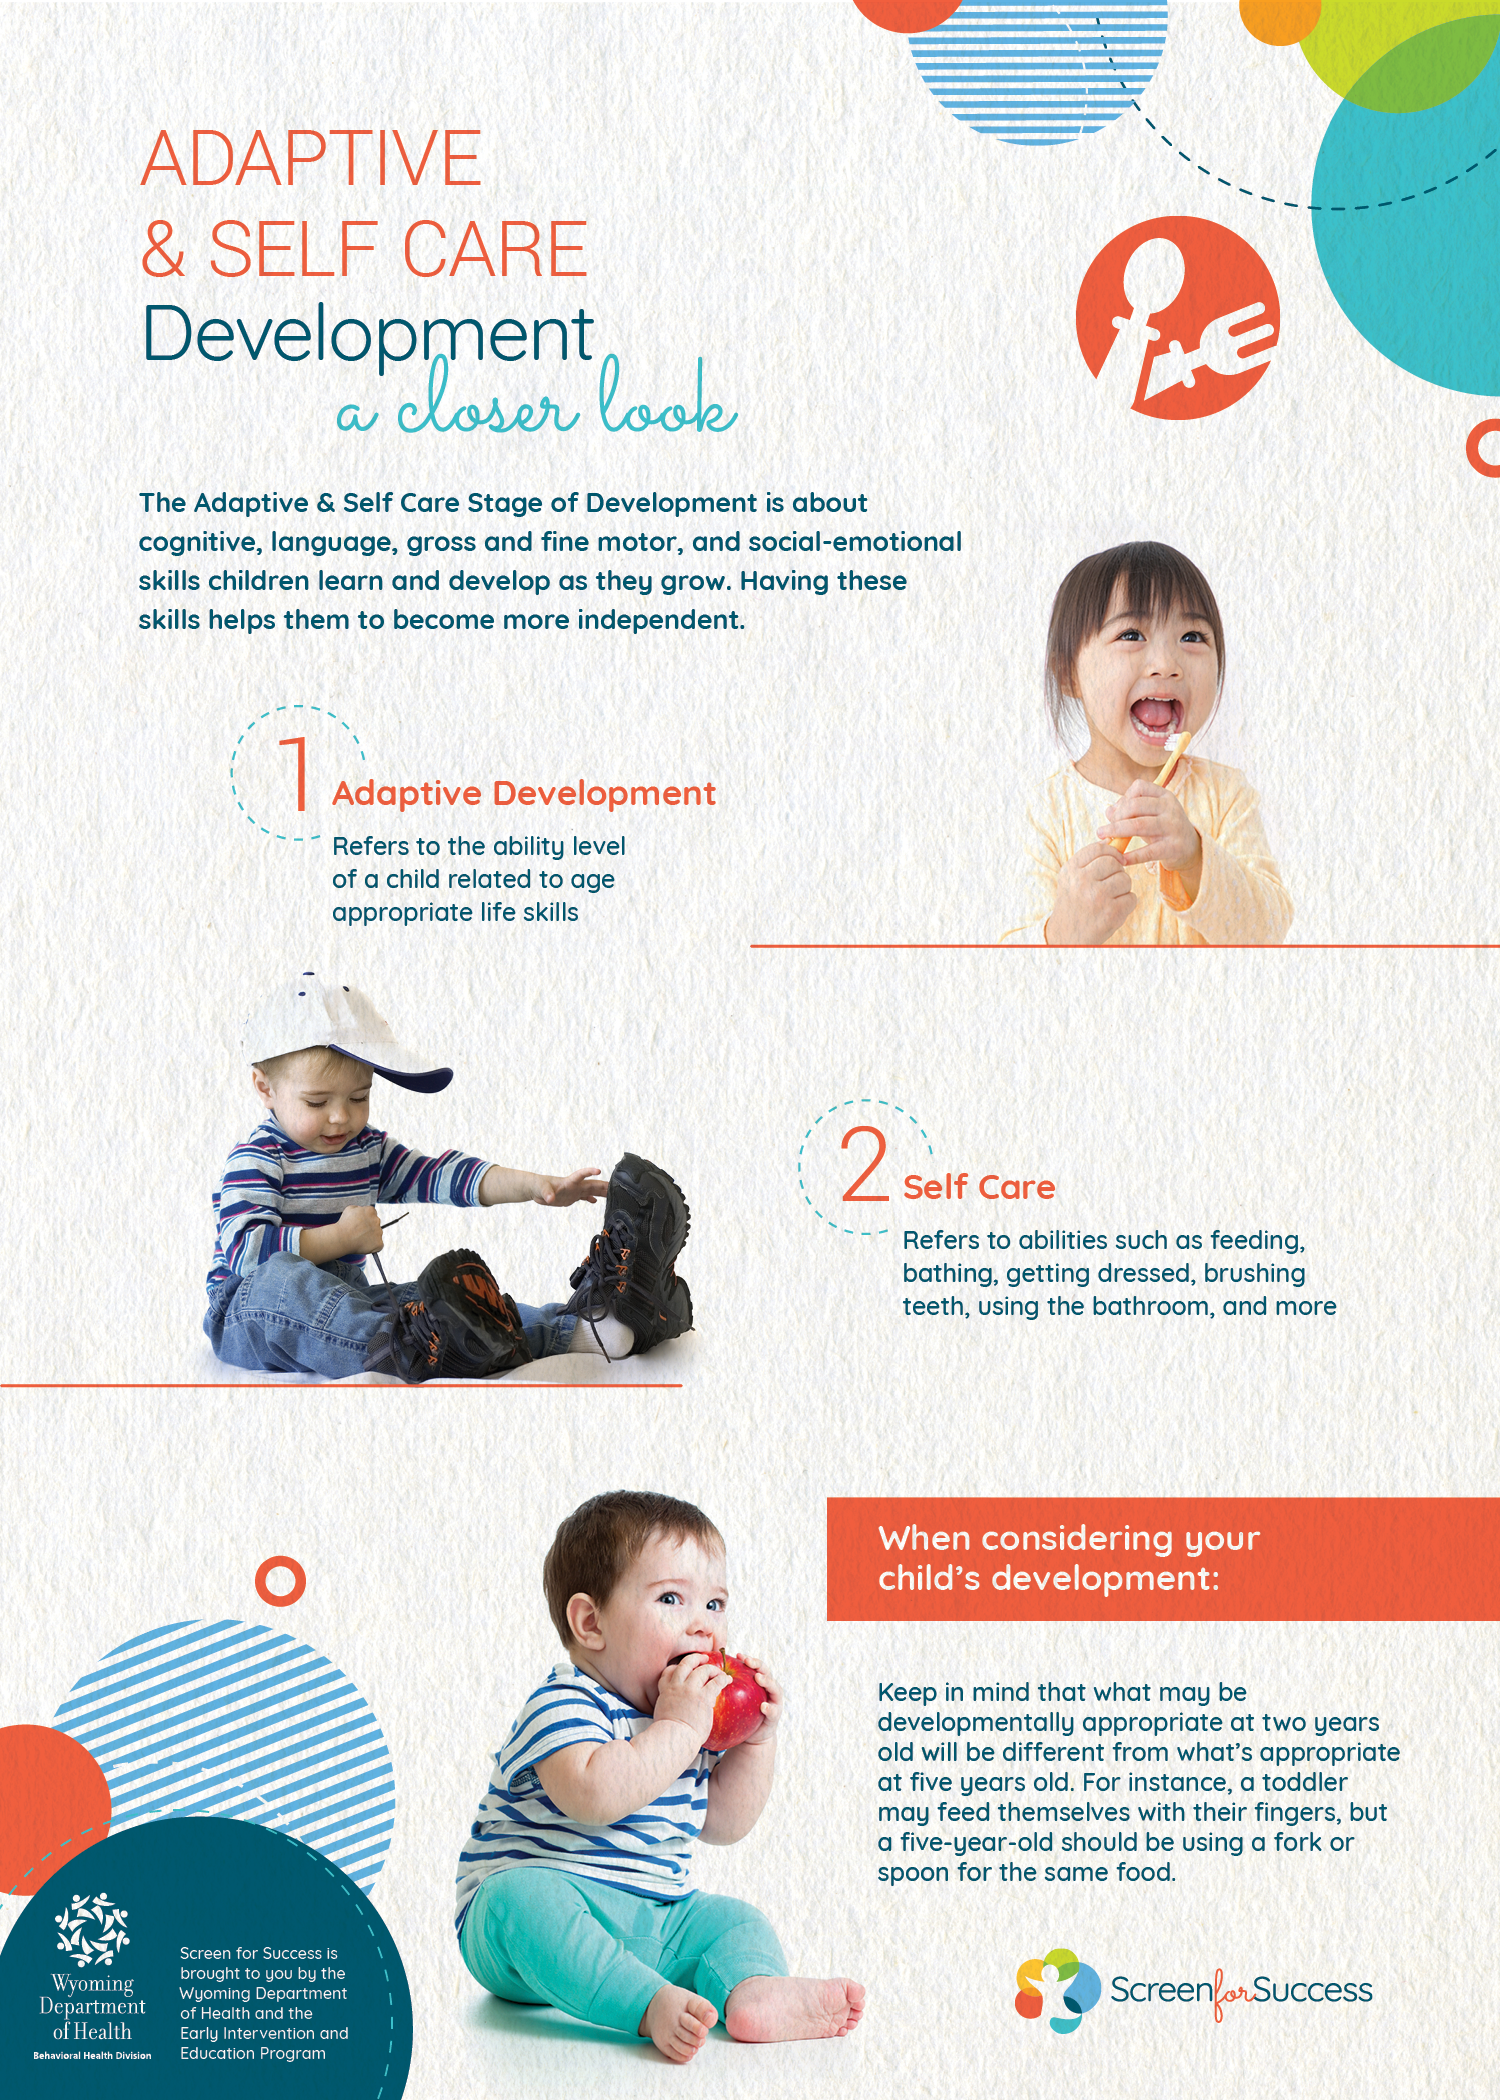 Adaptive and Self Care Development Activities Graphic